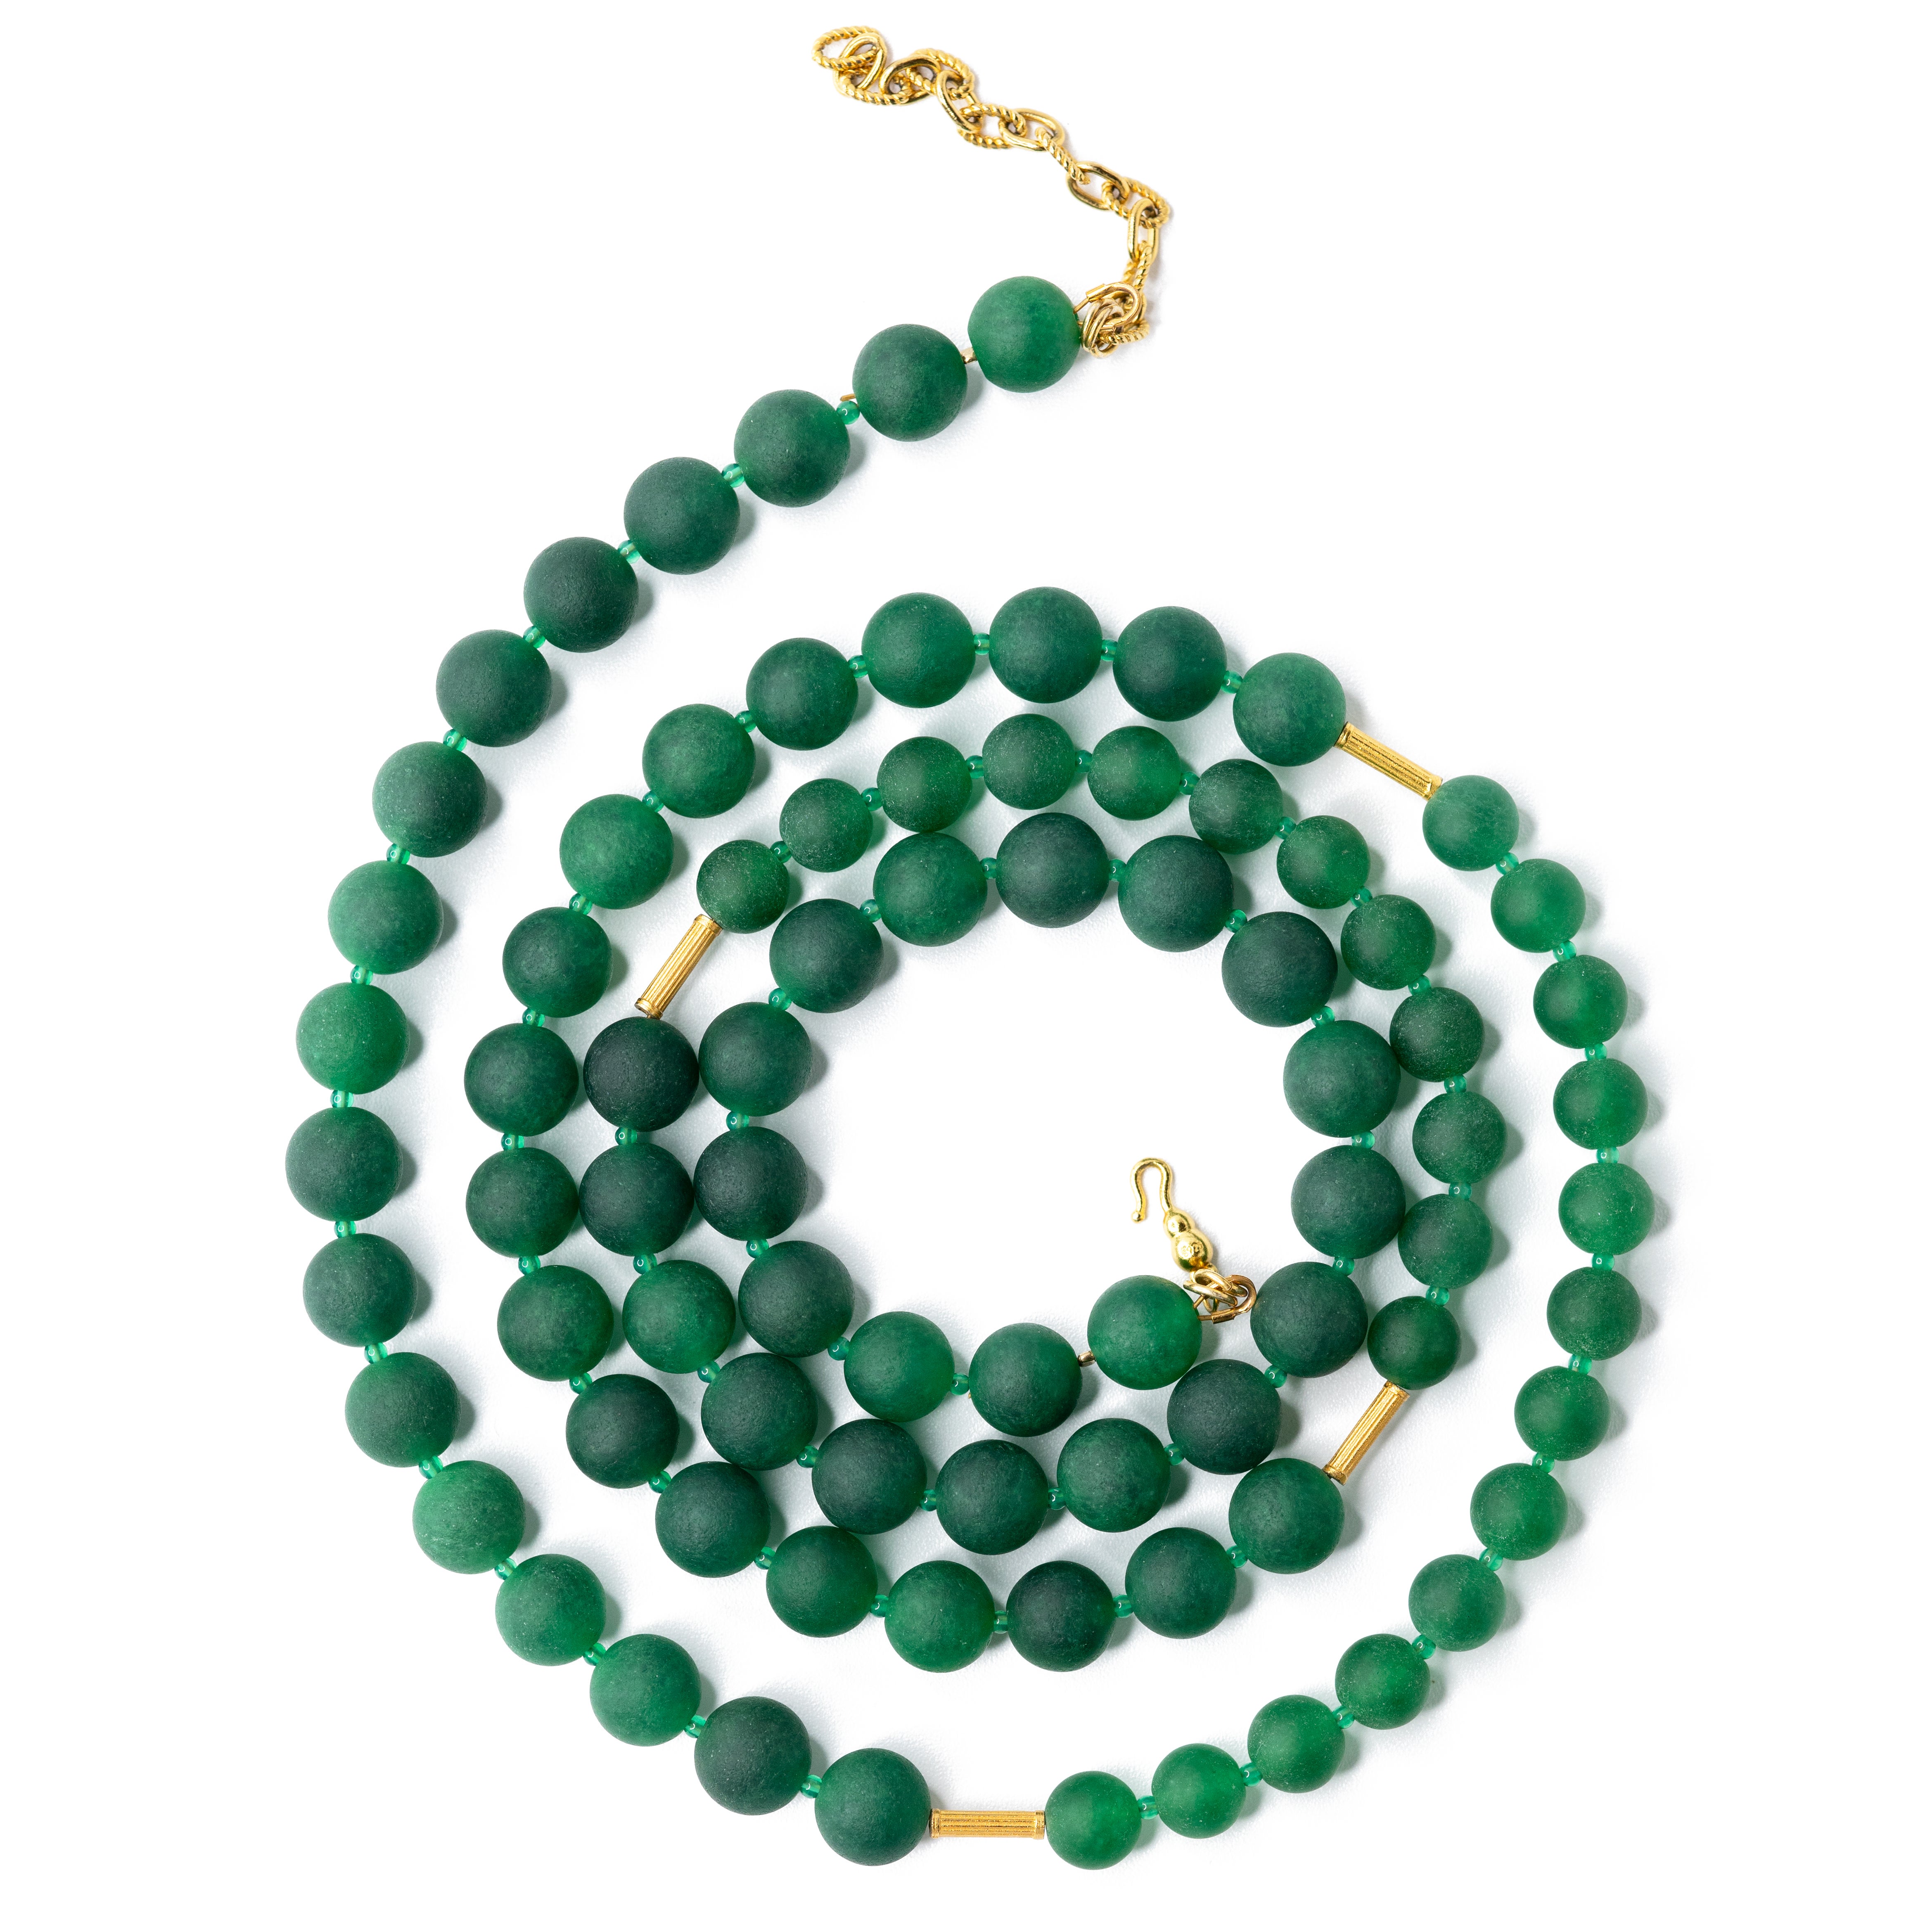 Green Chalcedony Beads and Gold Necklace -The Poet's Garden by Bombyx House For Sale